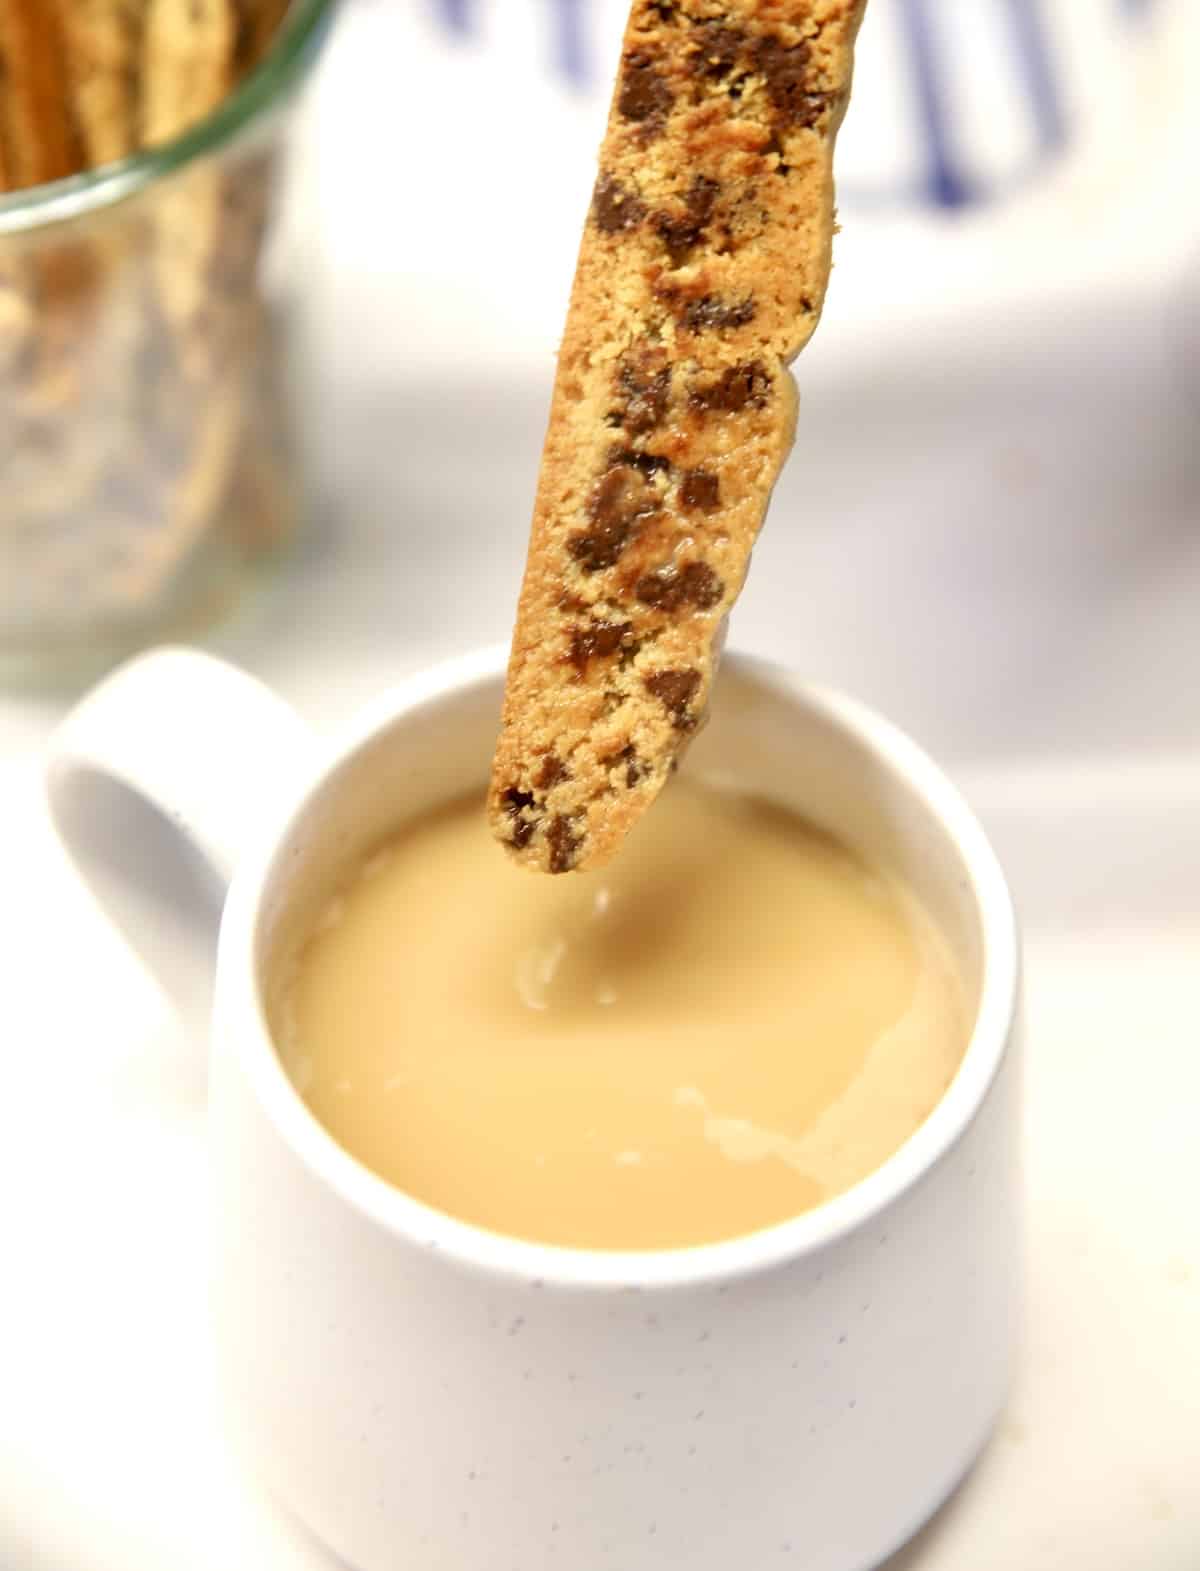 Biscotti dipping into coffee cup.